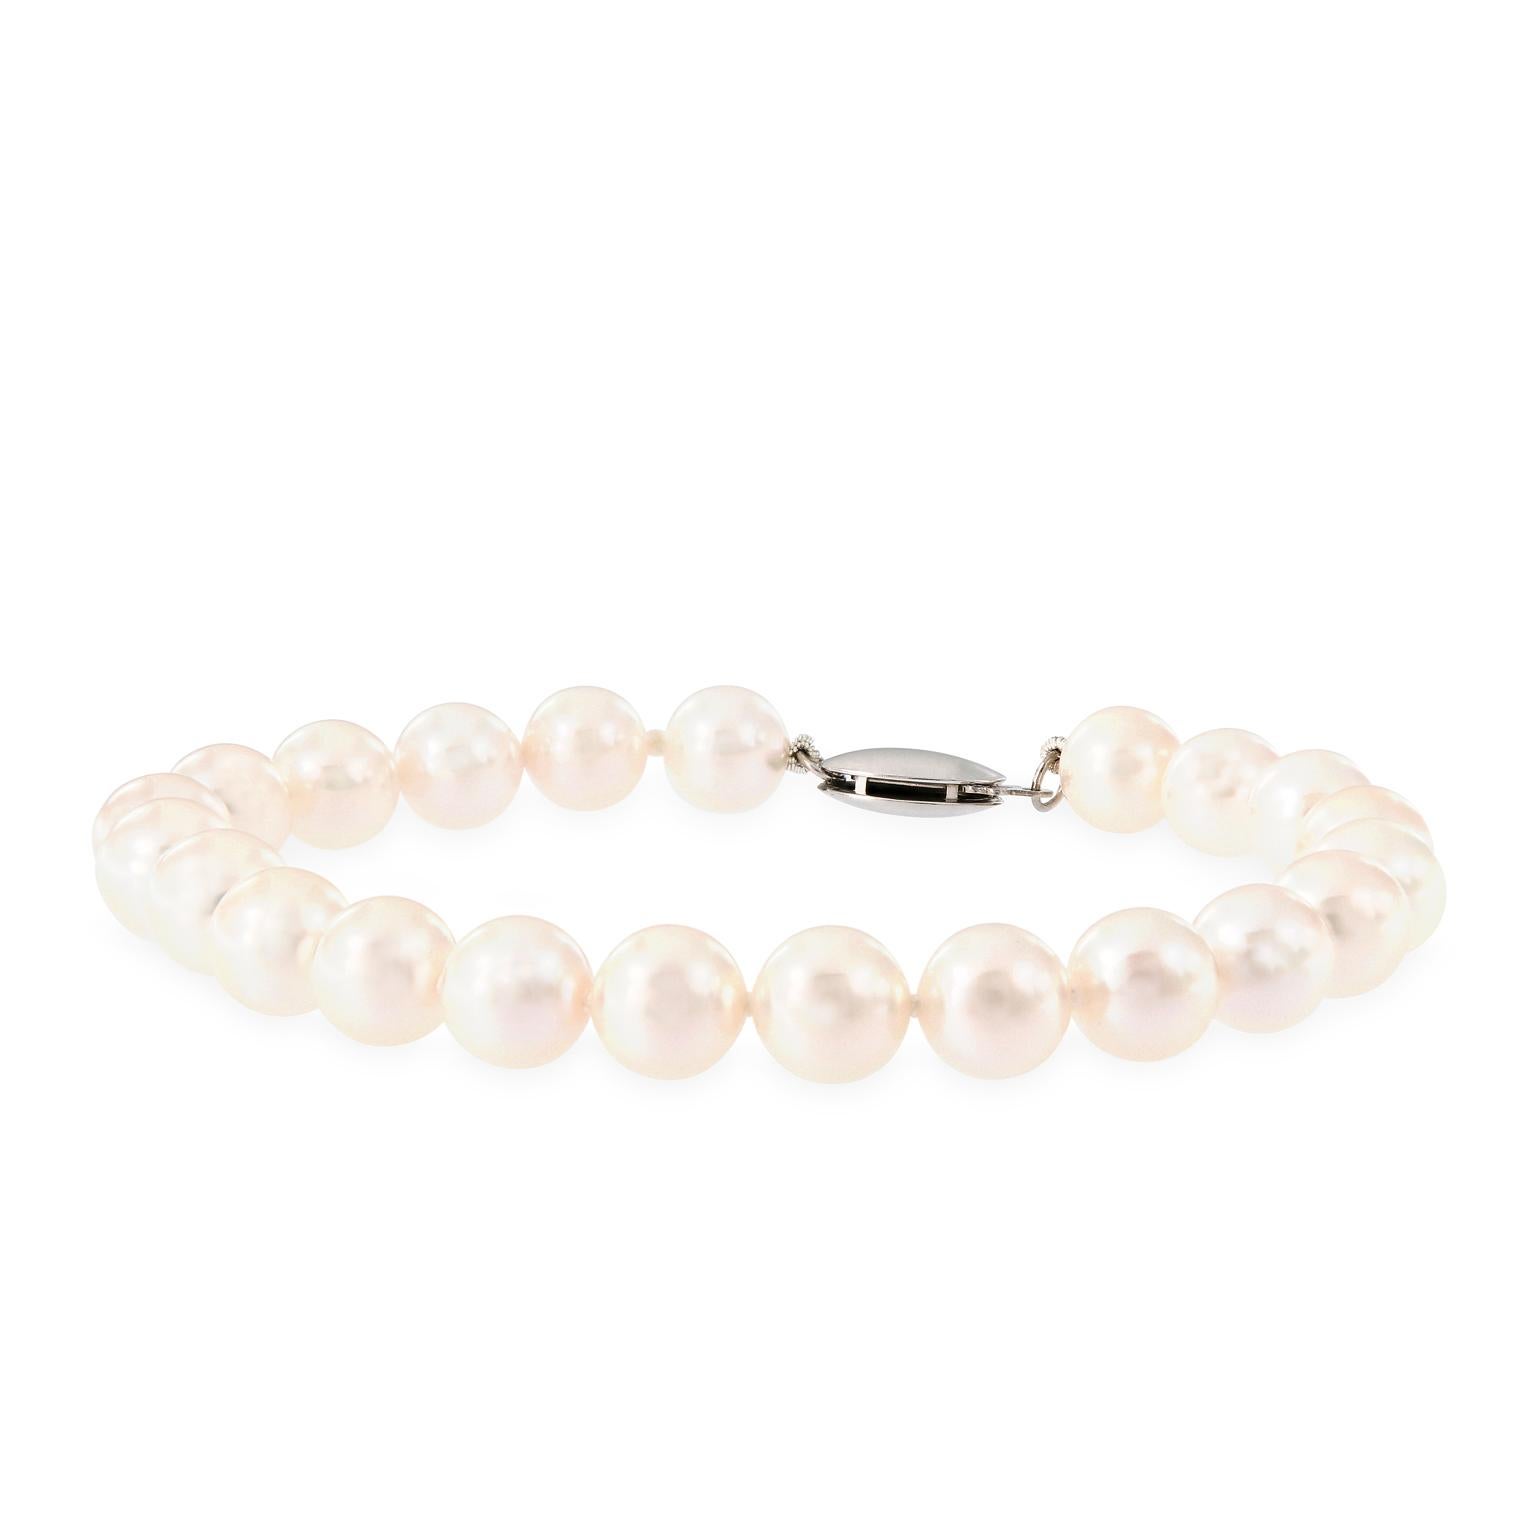 The perfect gift for graduation or confirmation! This bracelet features 22 cultured white pearls with rose' overtones . Pearls are hand-knotted and held secure to the wrist with a 14k white gold fish hook clasp. Pearls are 7-7.5mm and AA quality.